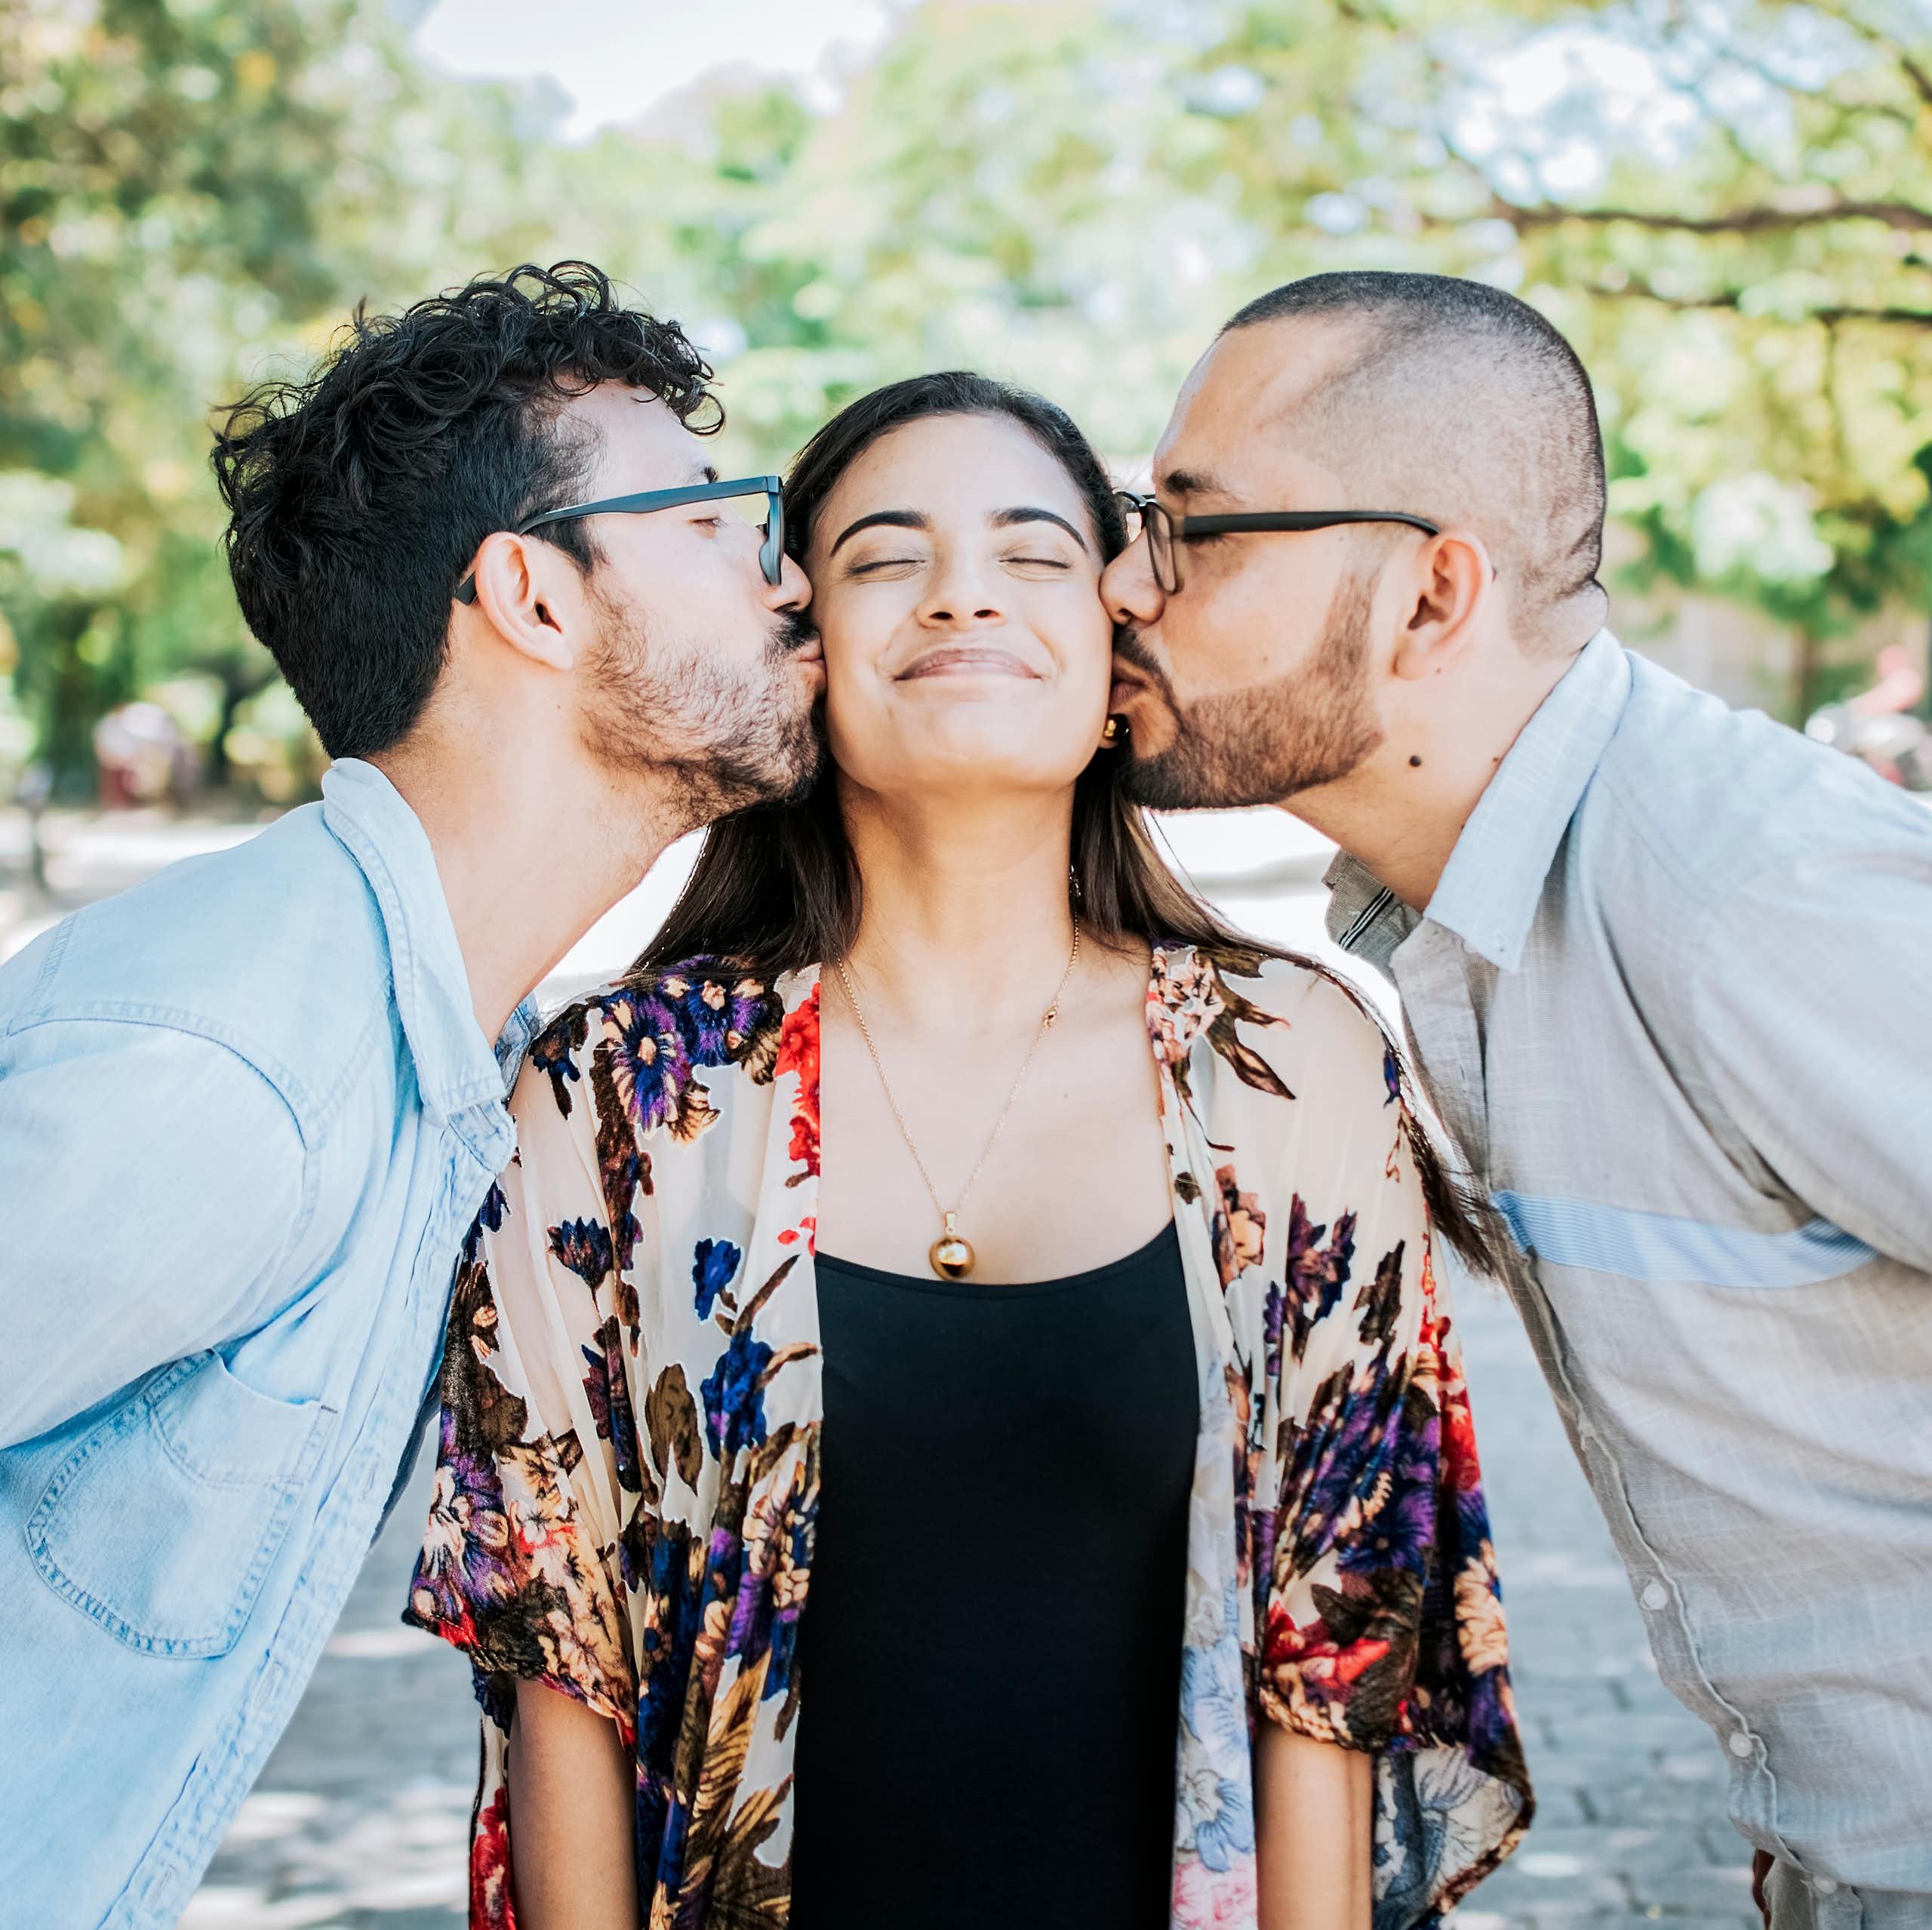 Two men kiss a woman on either cheek